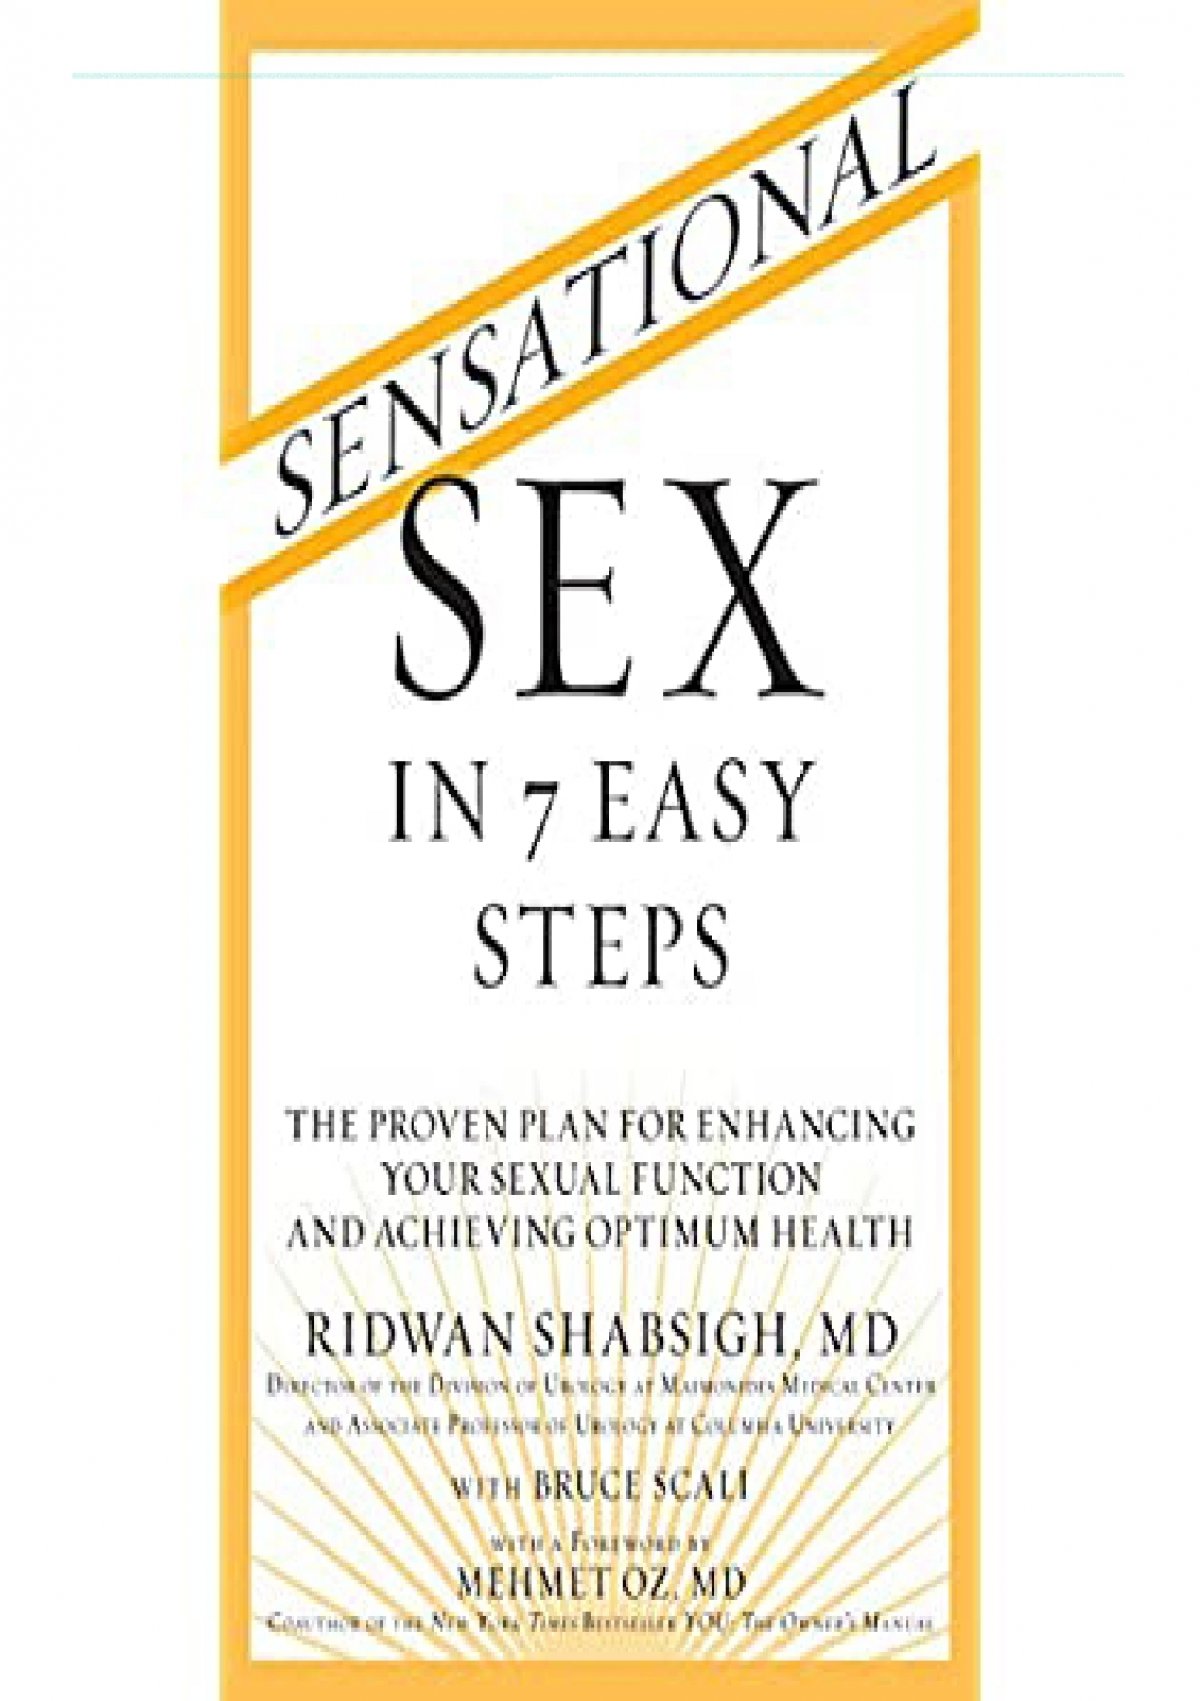 Pdf Sensational Sex In 7 Easy Steps The Proven Plan For Enhancing Your Sexual Function And 2419